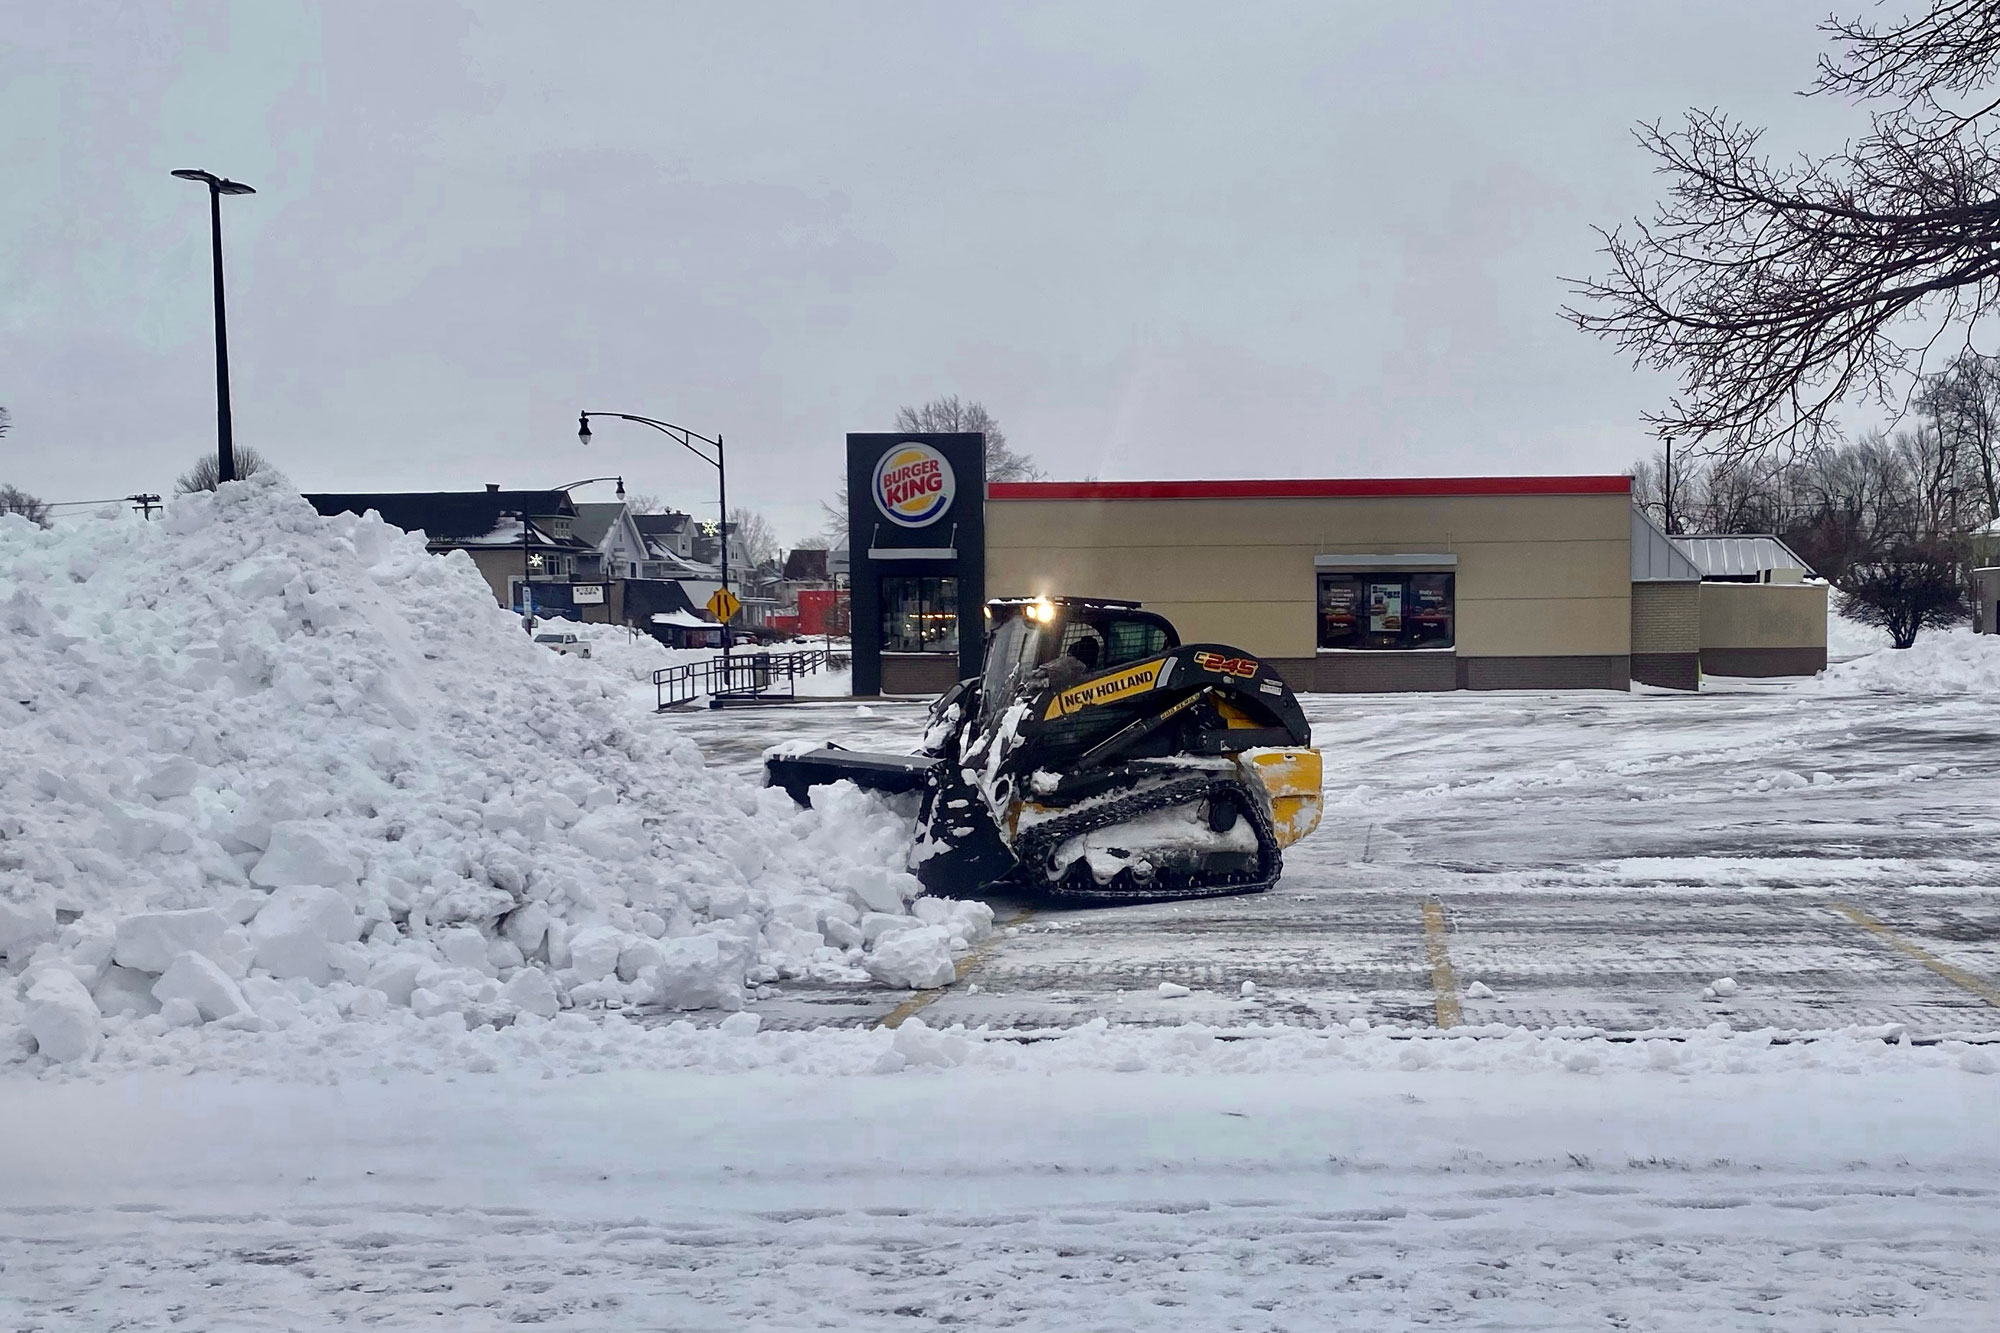 Photograph showing a small bulldozer clearing snow from the parking lot of a Burger King restaurant following a large snowstorm in Buffalo, New York, in December 2022. The photo shows a small black and yellow bulldozer pushing snow into a big pile. The restaurant can be seen in the background.